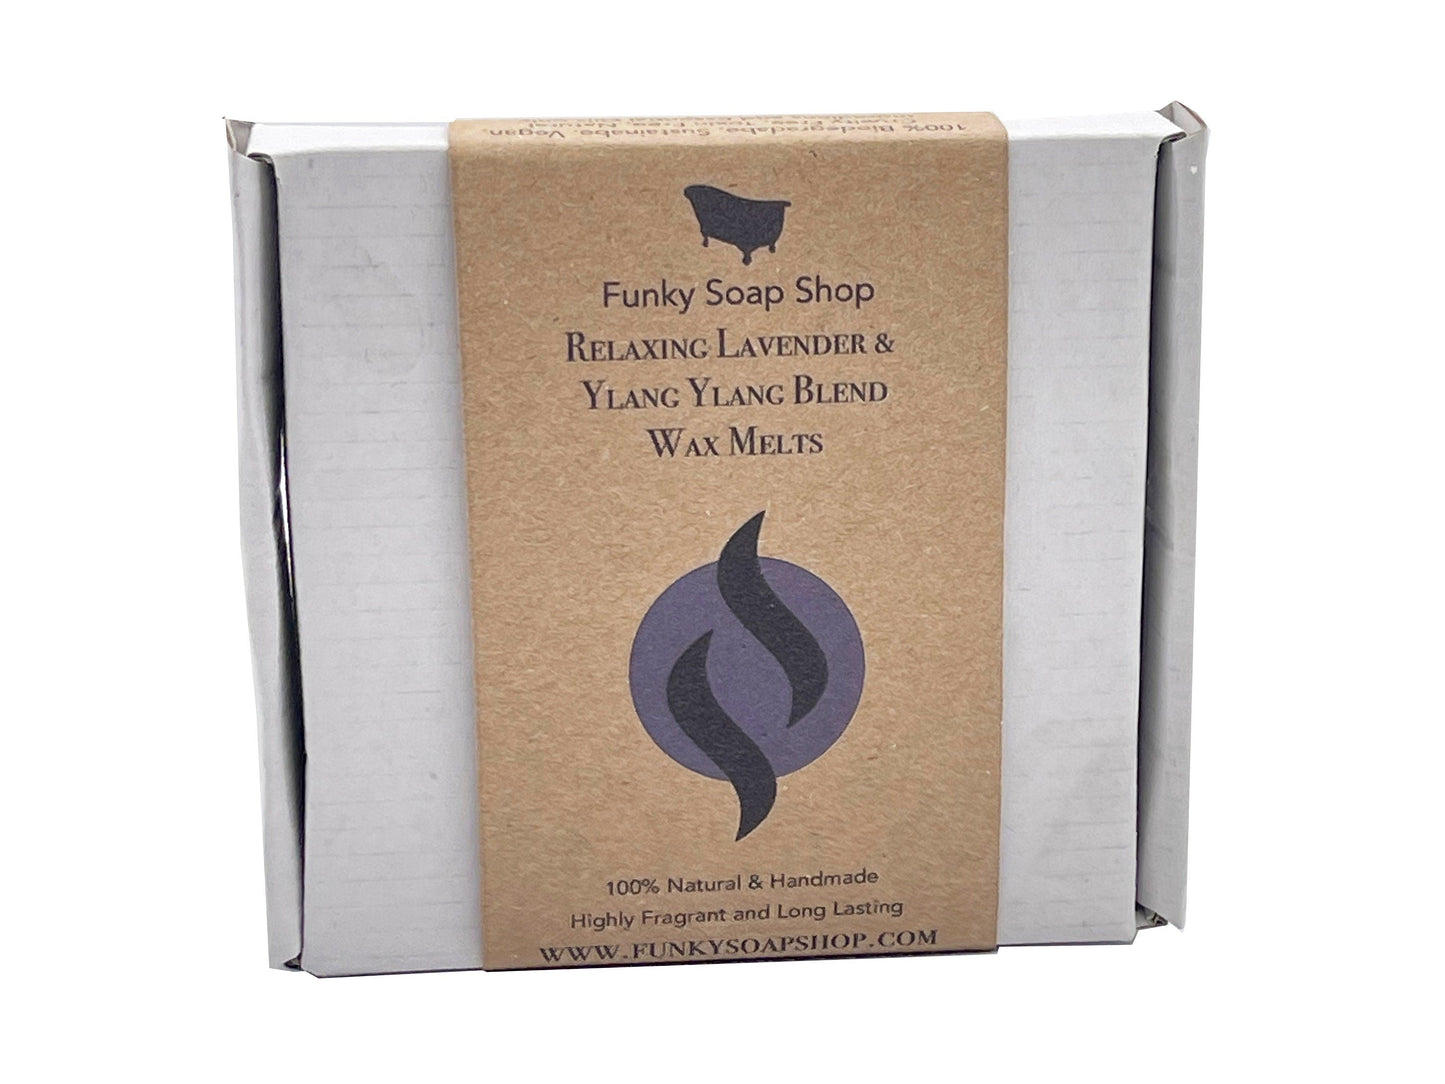 Relaxing Lavender and Ylang Ylang Blend Blend Wax Melts, 12 cubes 90g total - Funky Soap Shop